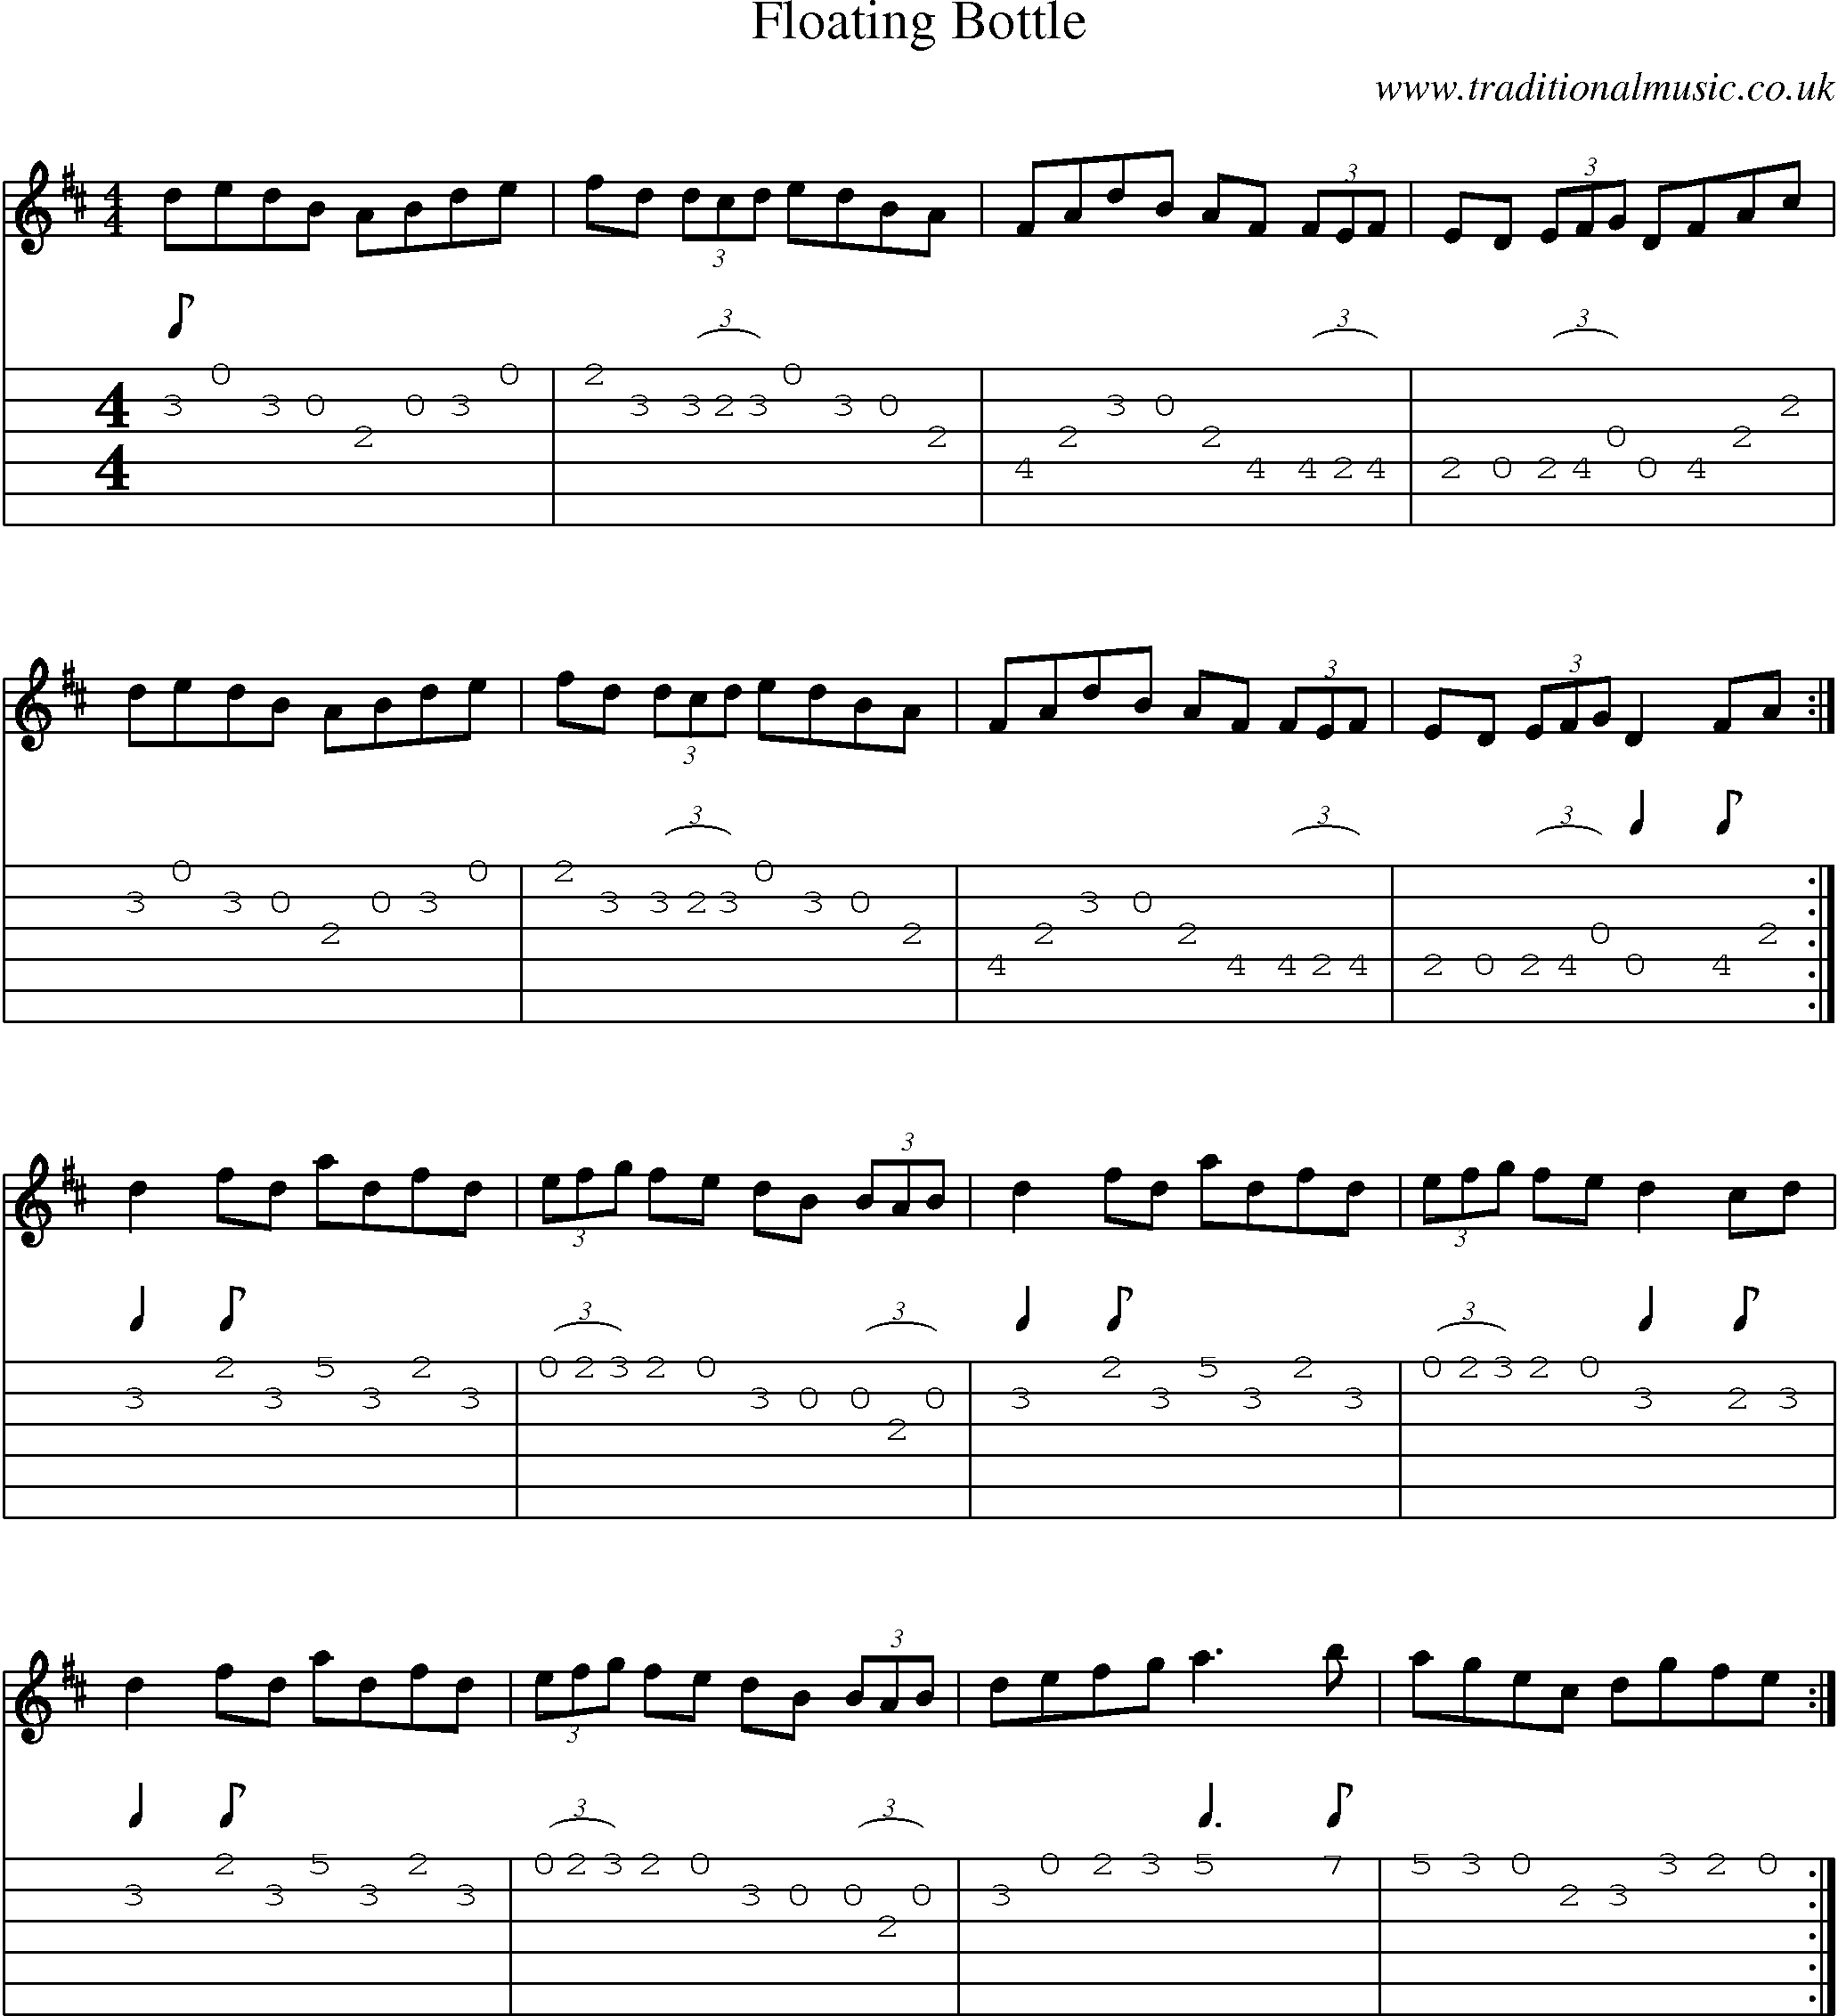 Music Score and Guitar Tabs for Floating Bottle